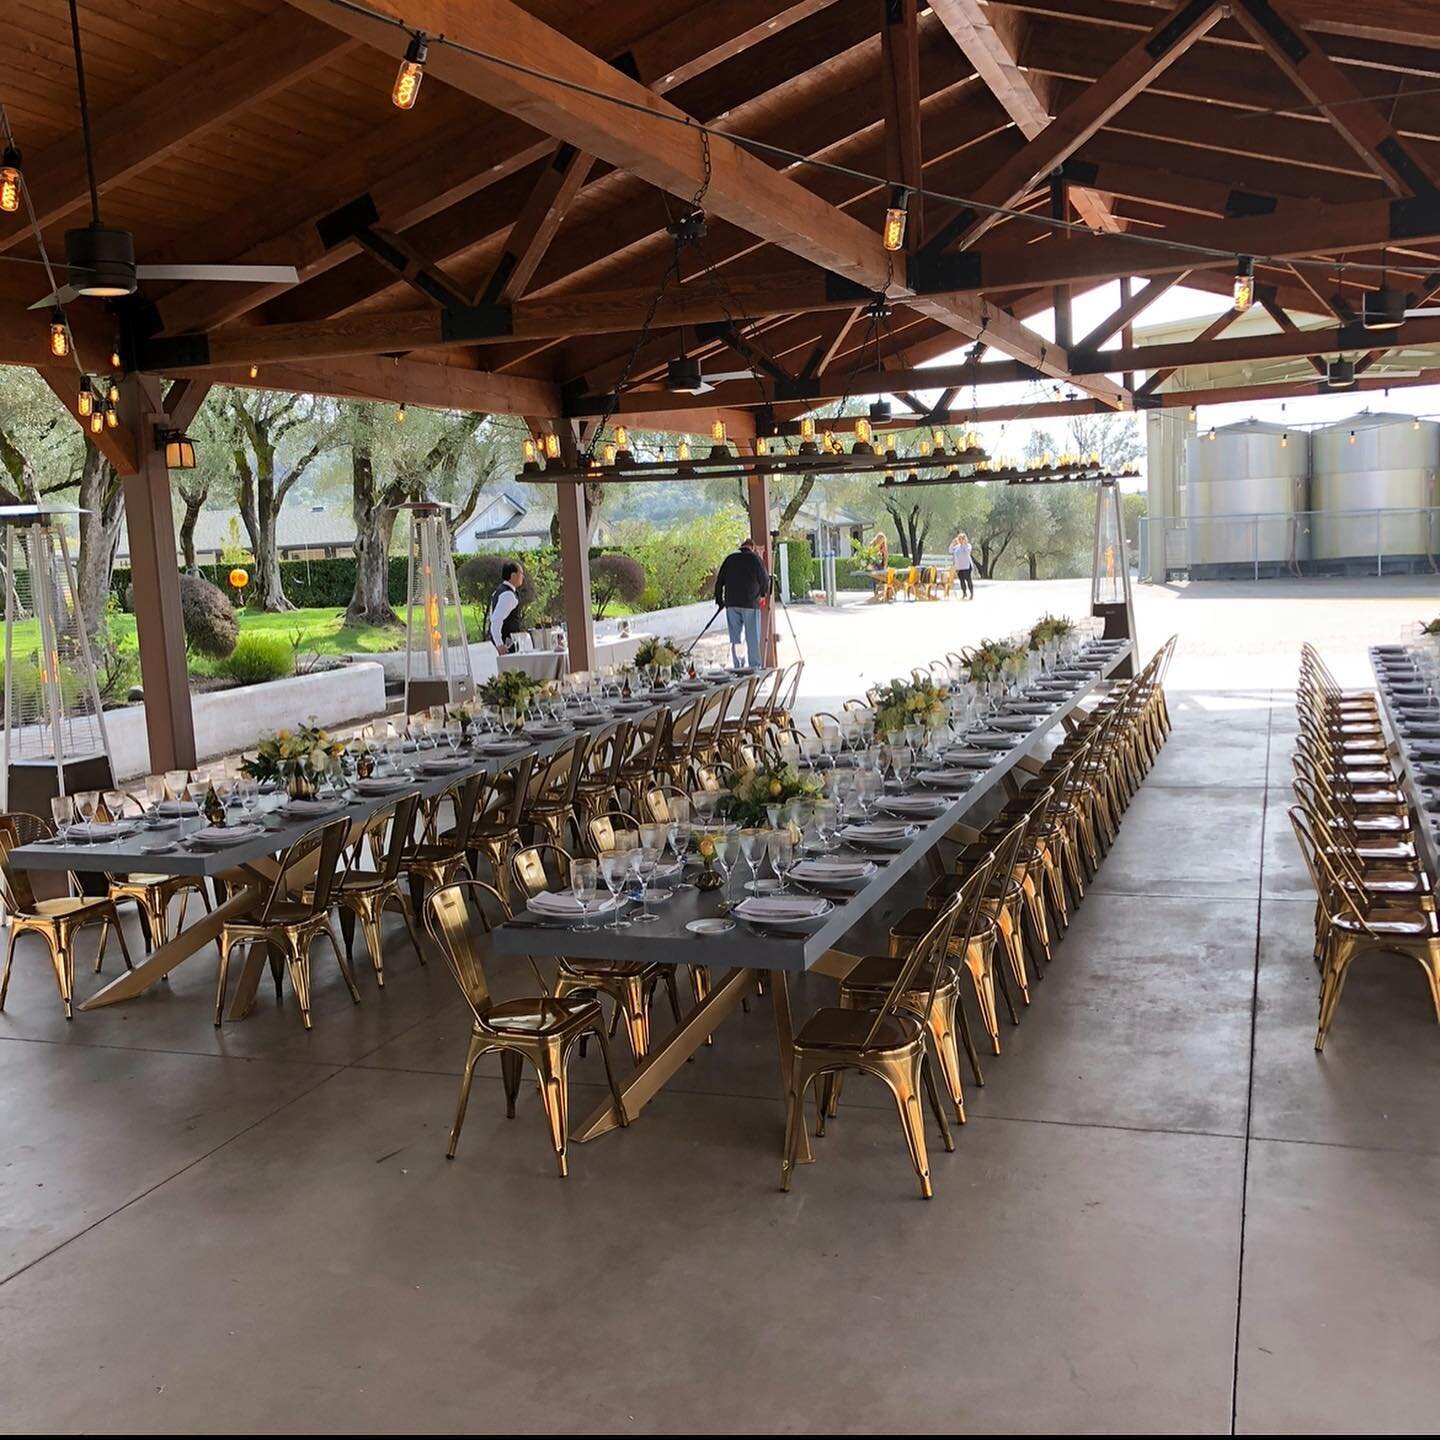 Whether your group is 20 people or 200 people, Napa Valley has something for everyone.
Private tastings to garden tours, exclusive cave dining experiences and private collections&hellip;you can even pick your own grapes to custom blend and font forge